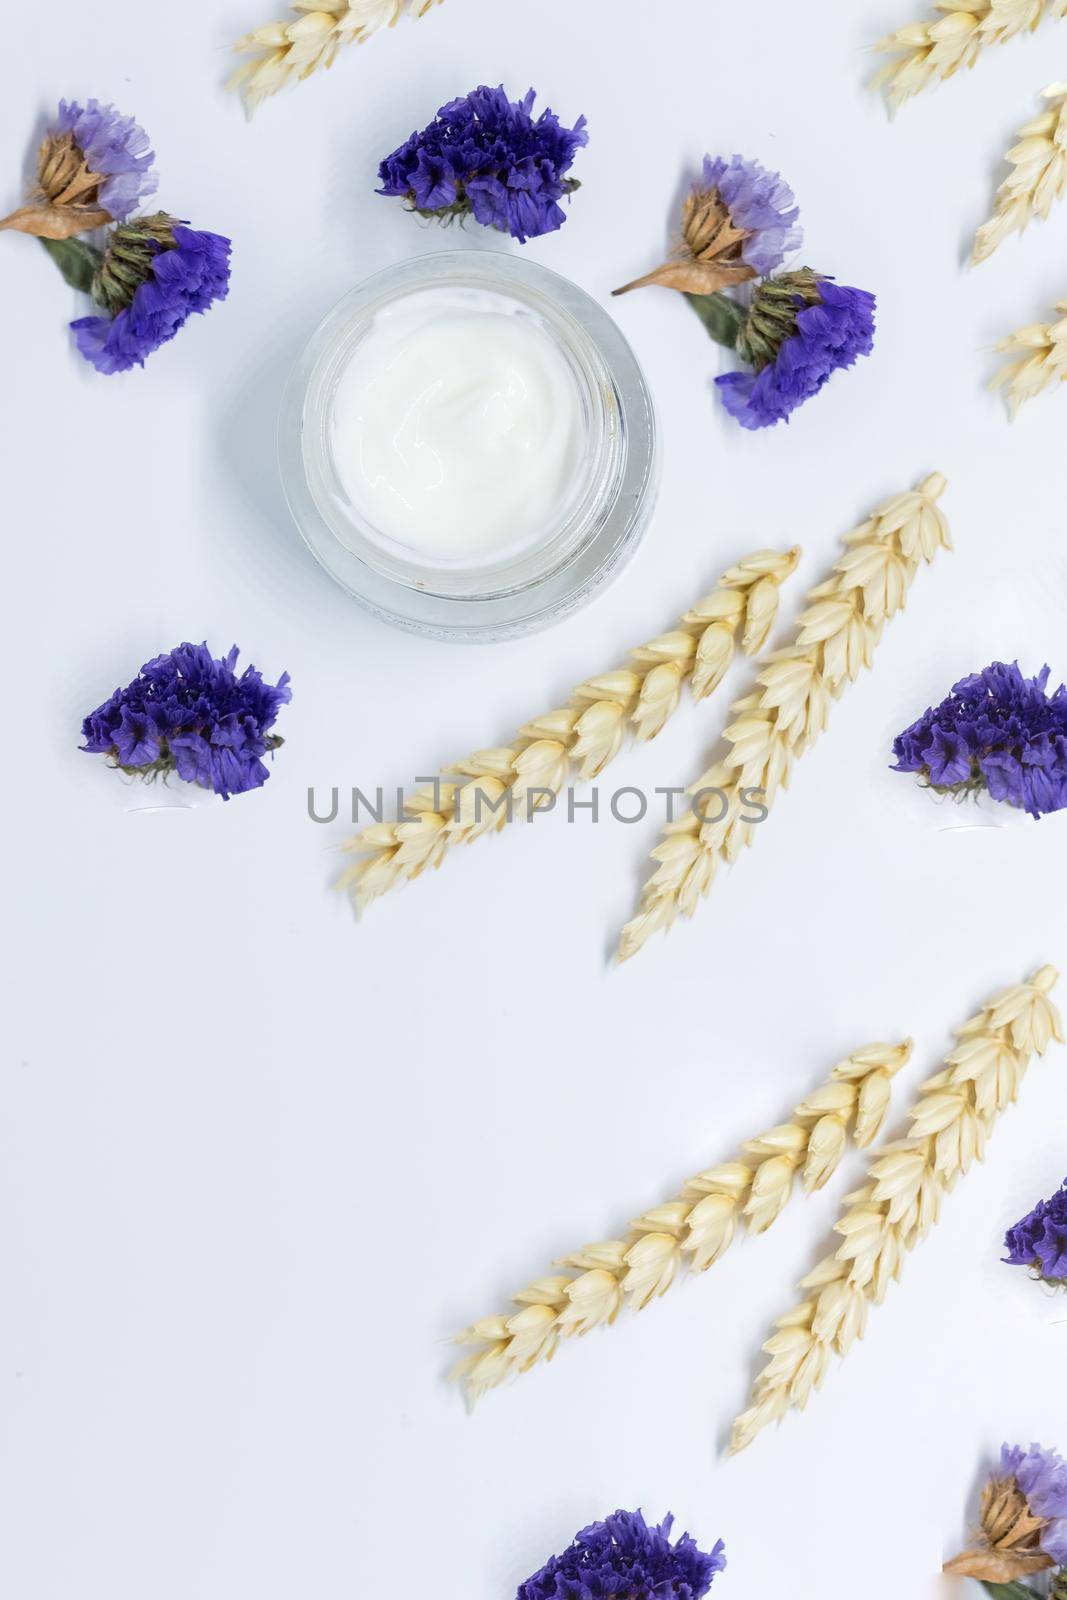 Cosmetic cream with blossom, top view isolated on white background. Luxurious cosmetics and makeup concept.